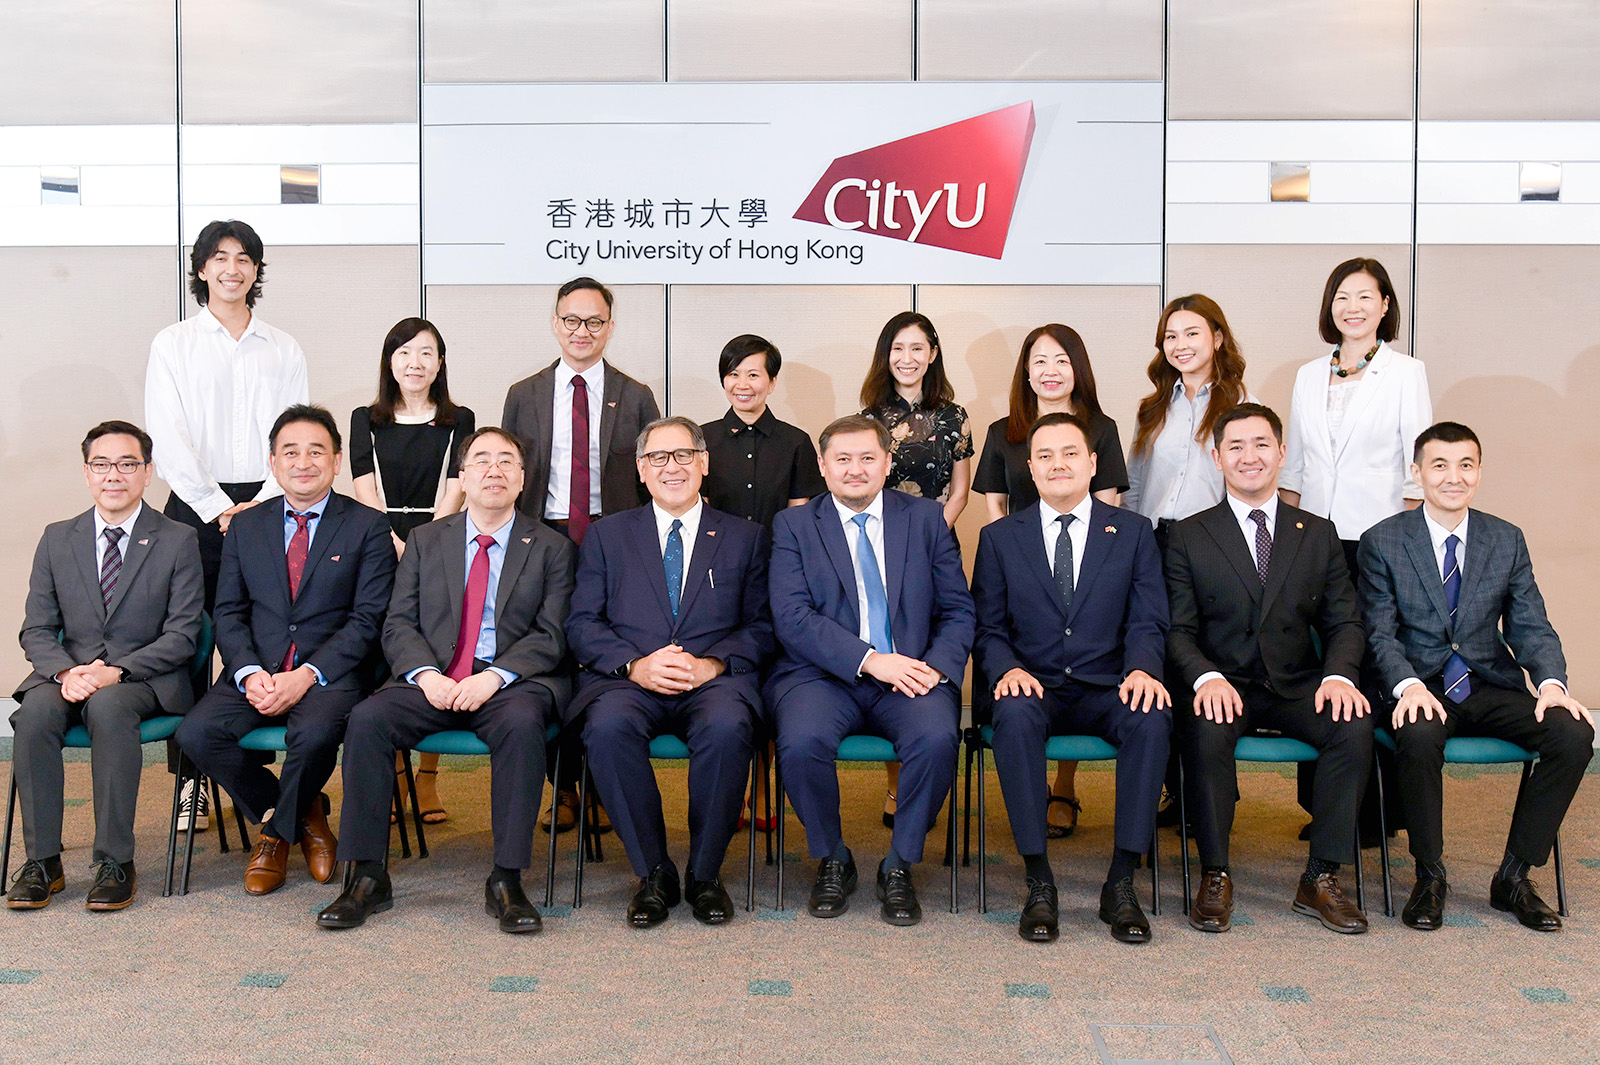 Mr Lester Garson Huang, Council Chairman of CityU, along with members of the management team warmly greeted and received the delegation from Kazakhstan.